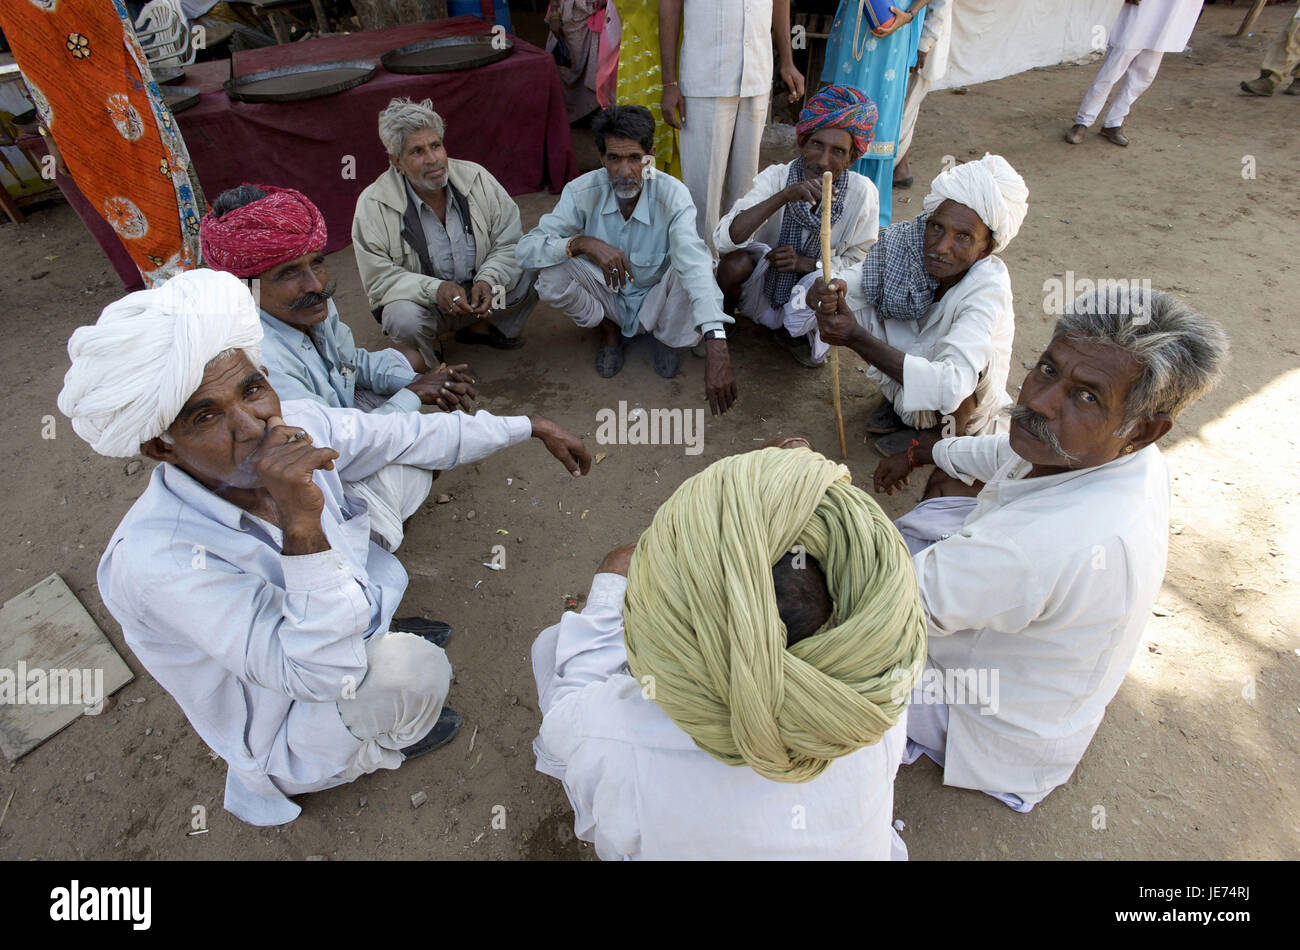 India, Rajasthan, Pushkar, men sit in the circle on the floor, Stock Photo